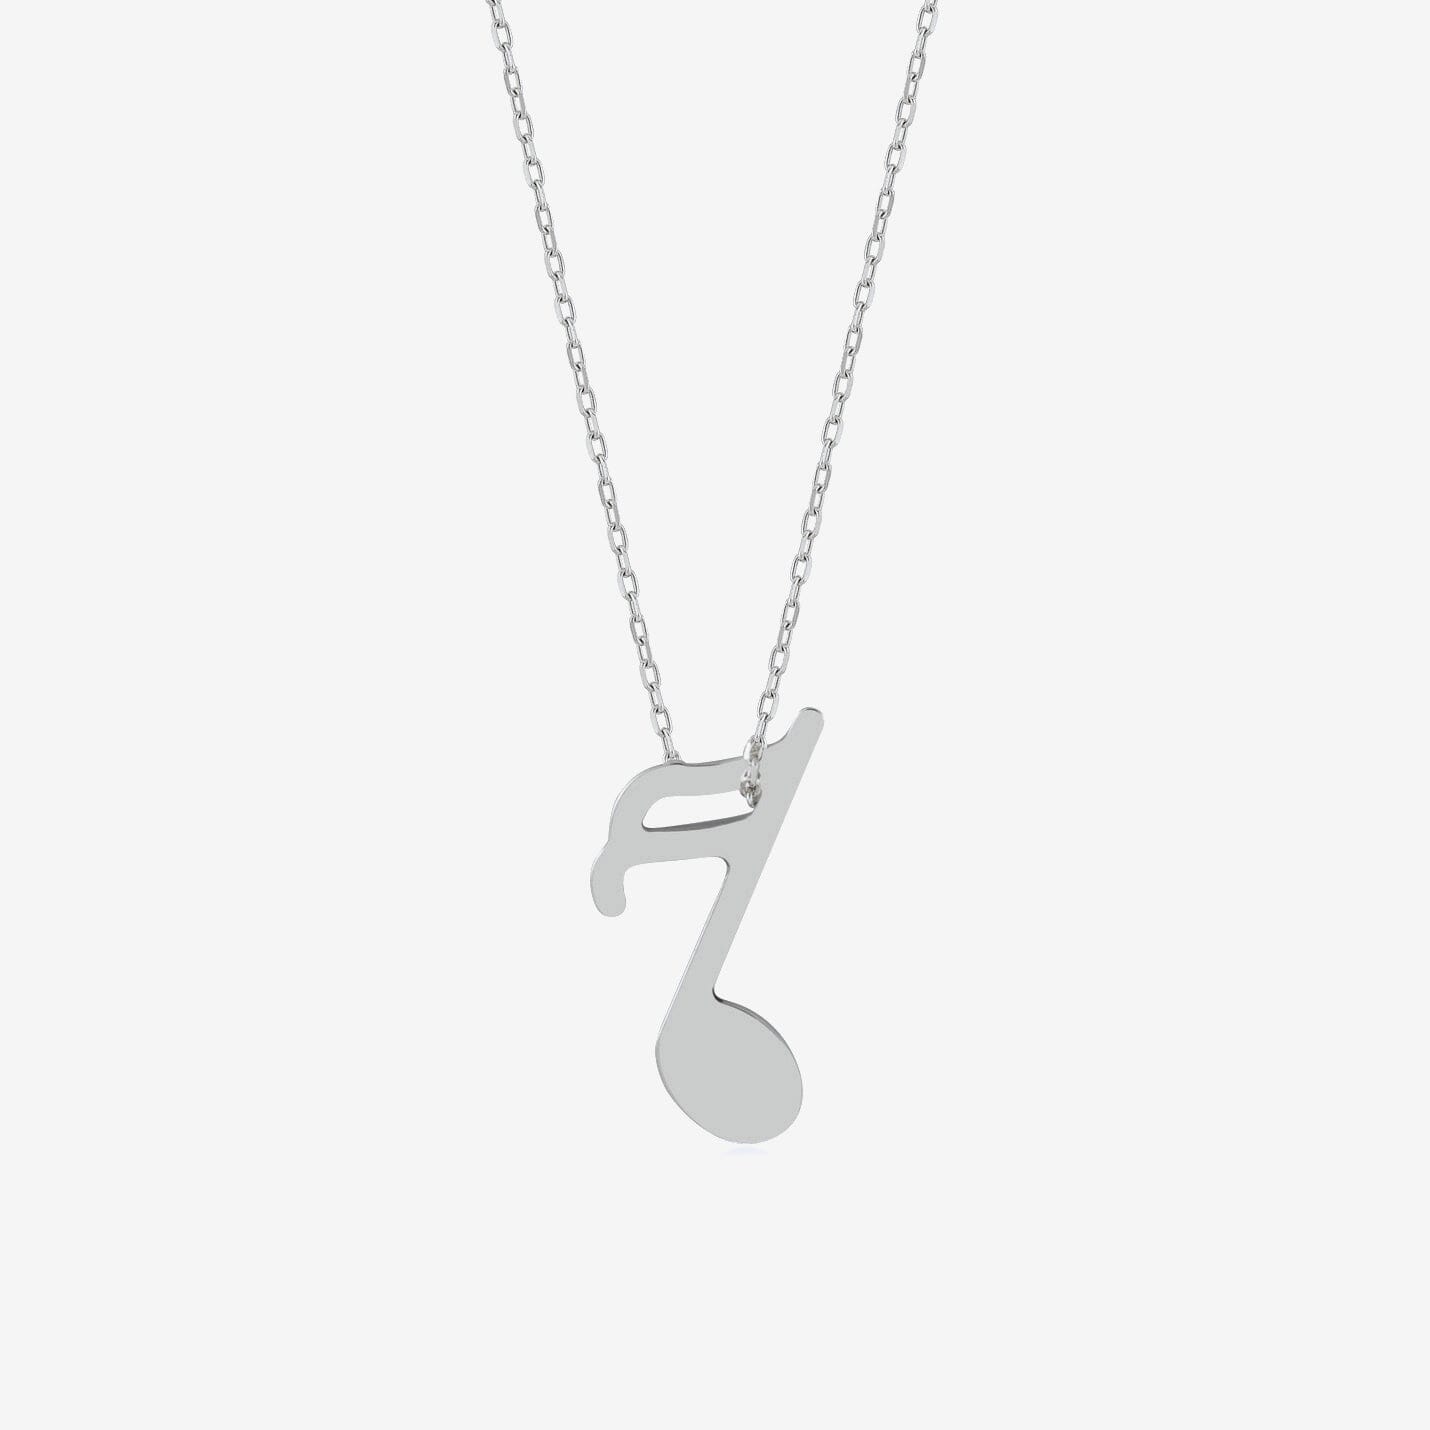 M Men Style Rock Star Musical Music Treble Clef Note Sysmbol Music Gift  With Chain Silver Zinc And Metal Music Sign Pendant Necklace Chain For Men  And Women : Amazon.in: Fashion